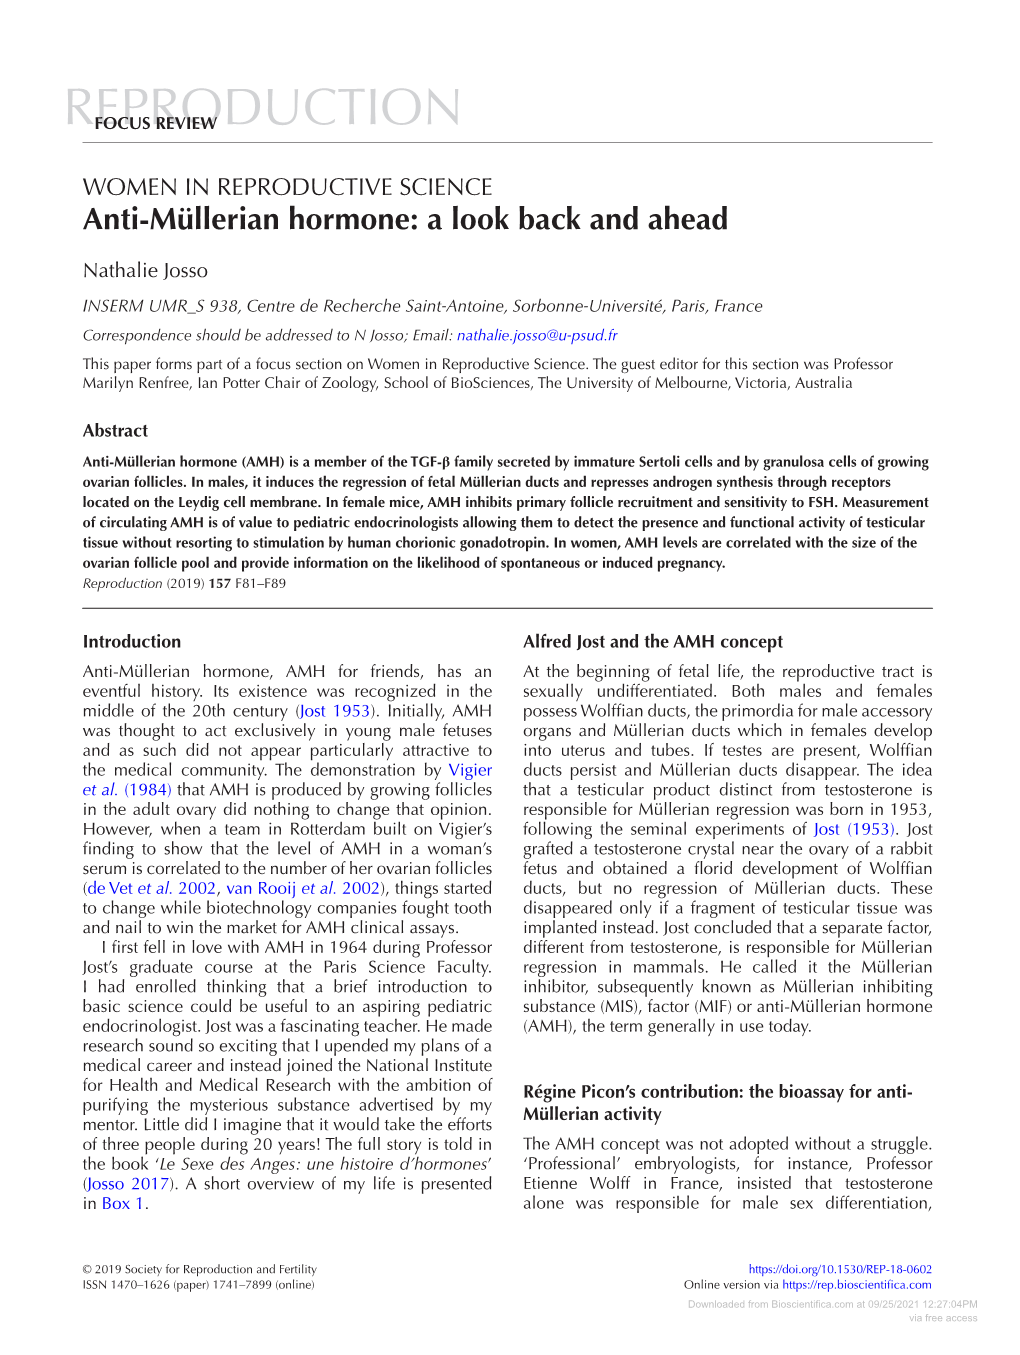 Anti-Müllerian Hormone: a Look Back and Ahead